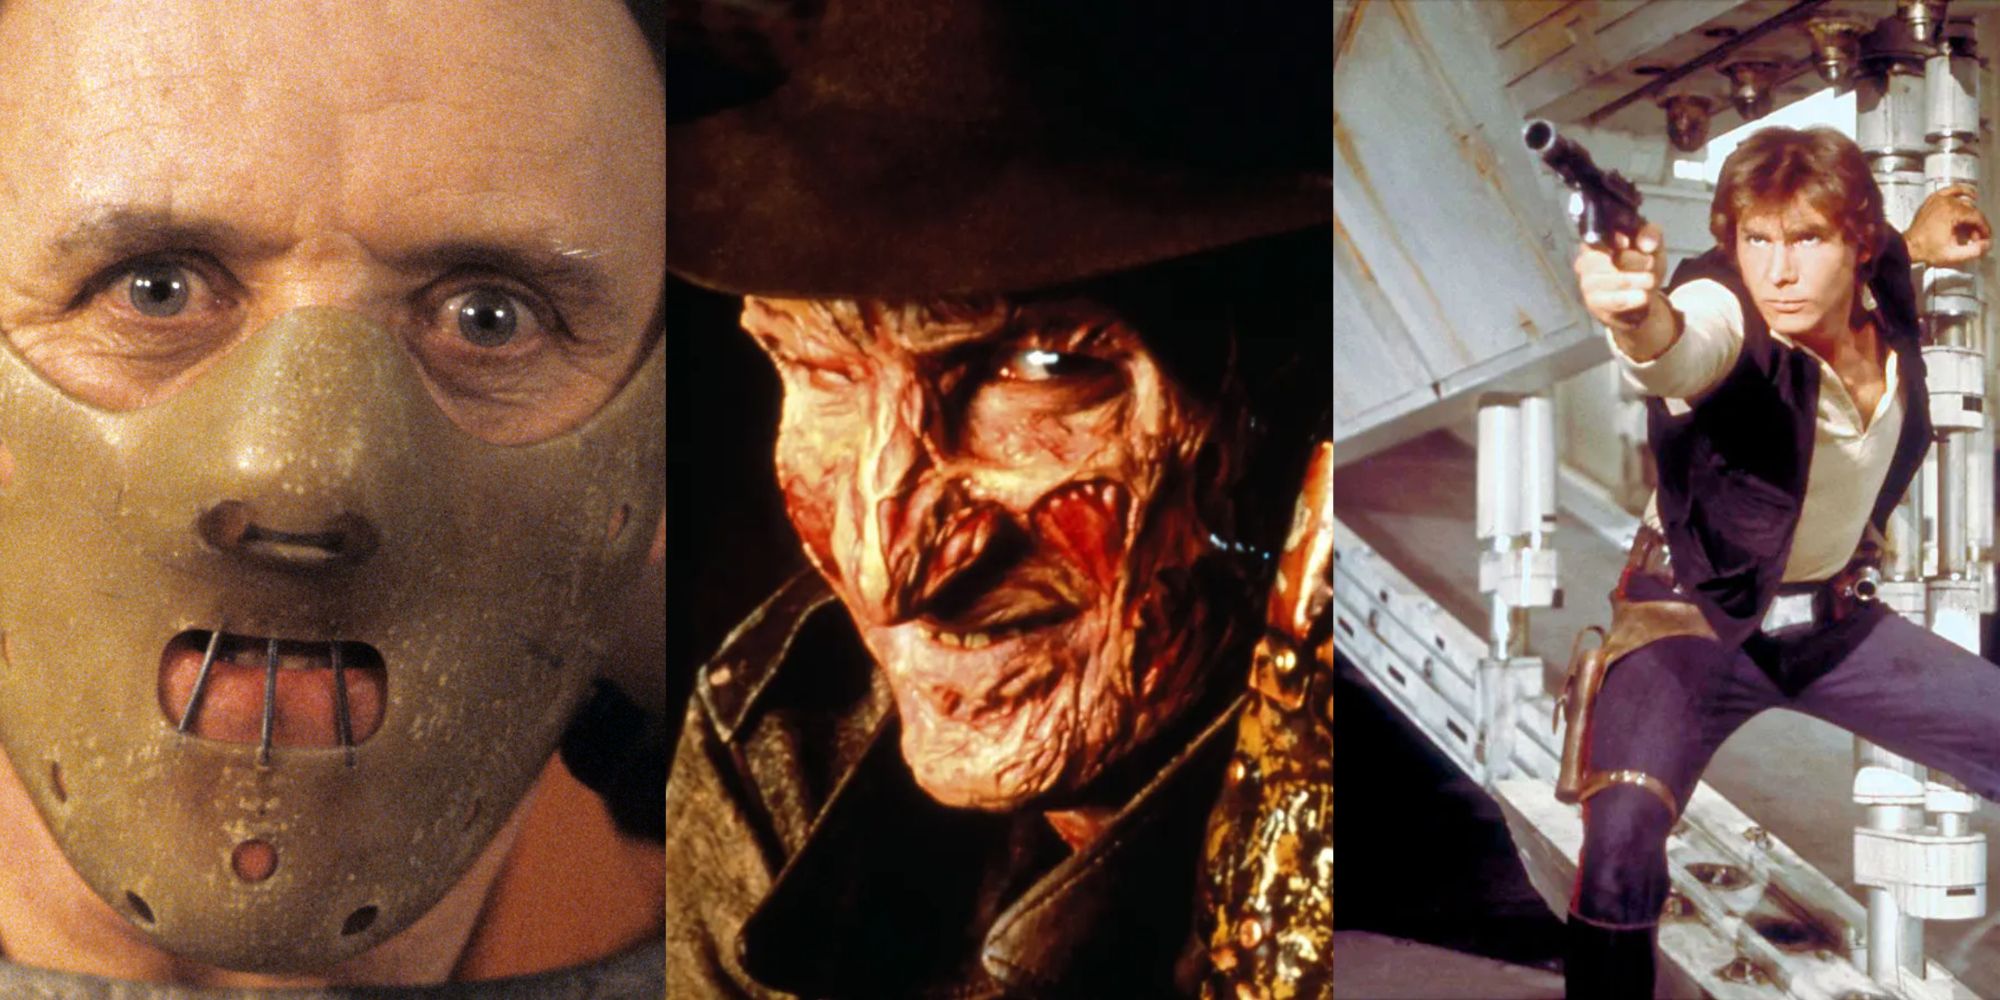 Anthony Hopkins as Lecter, Robert Englund as Krueger, Harrison Ford as Solo